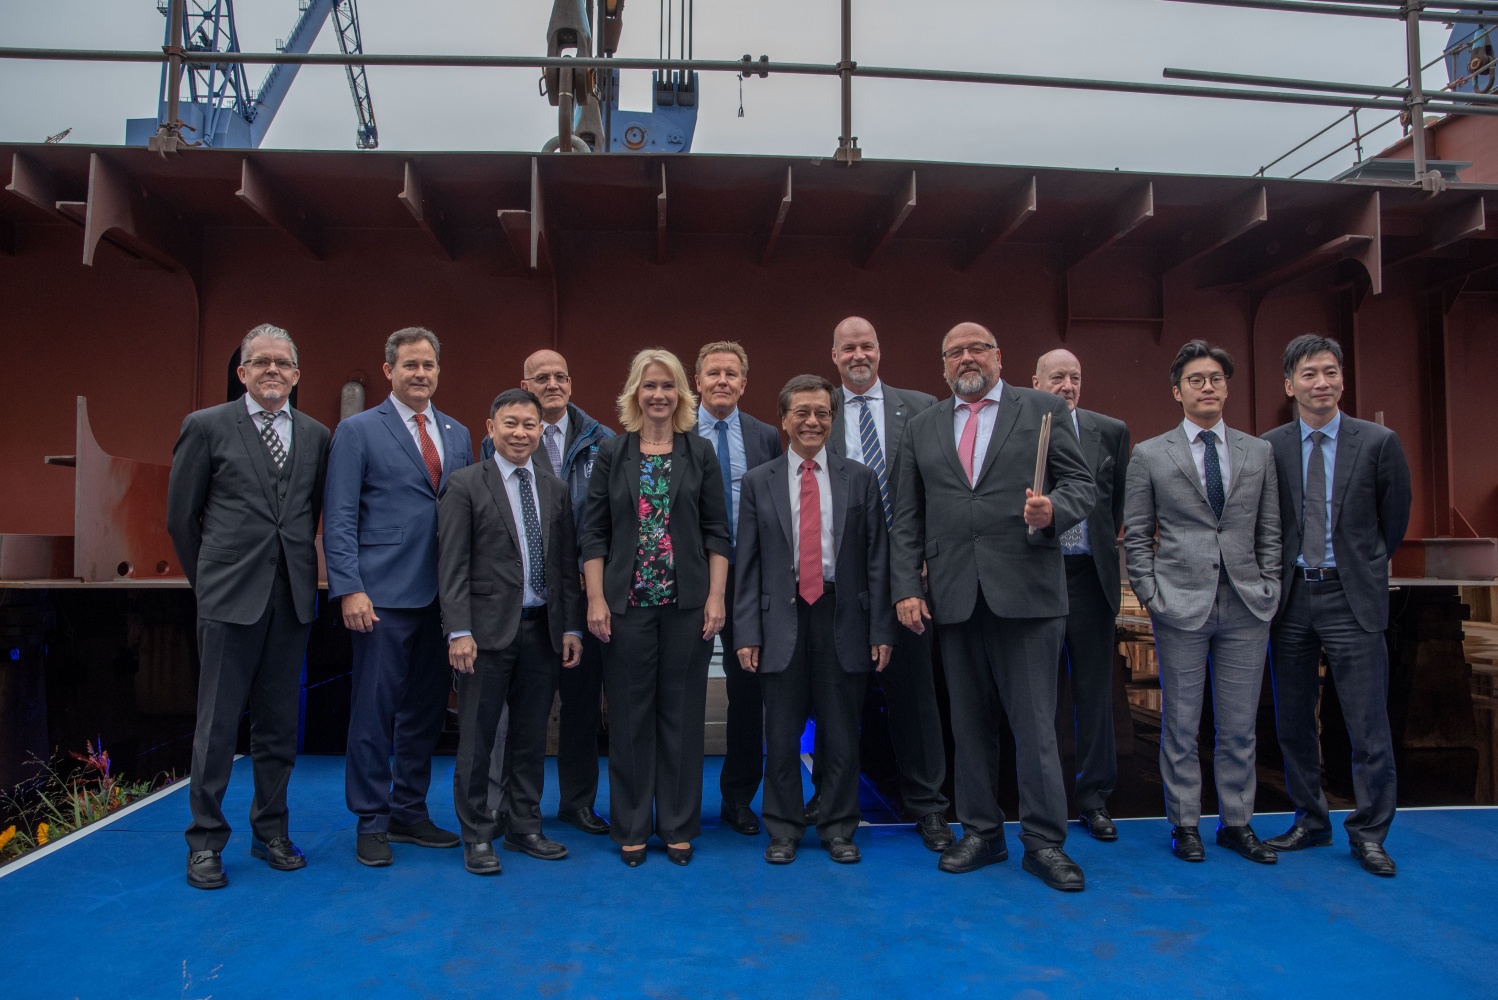 VIPs from Genting Hong Kong and the German government attend the keel laying ceremony for Dream Cruises’ new Global Class flagship at MV Werften.